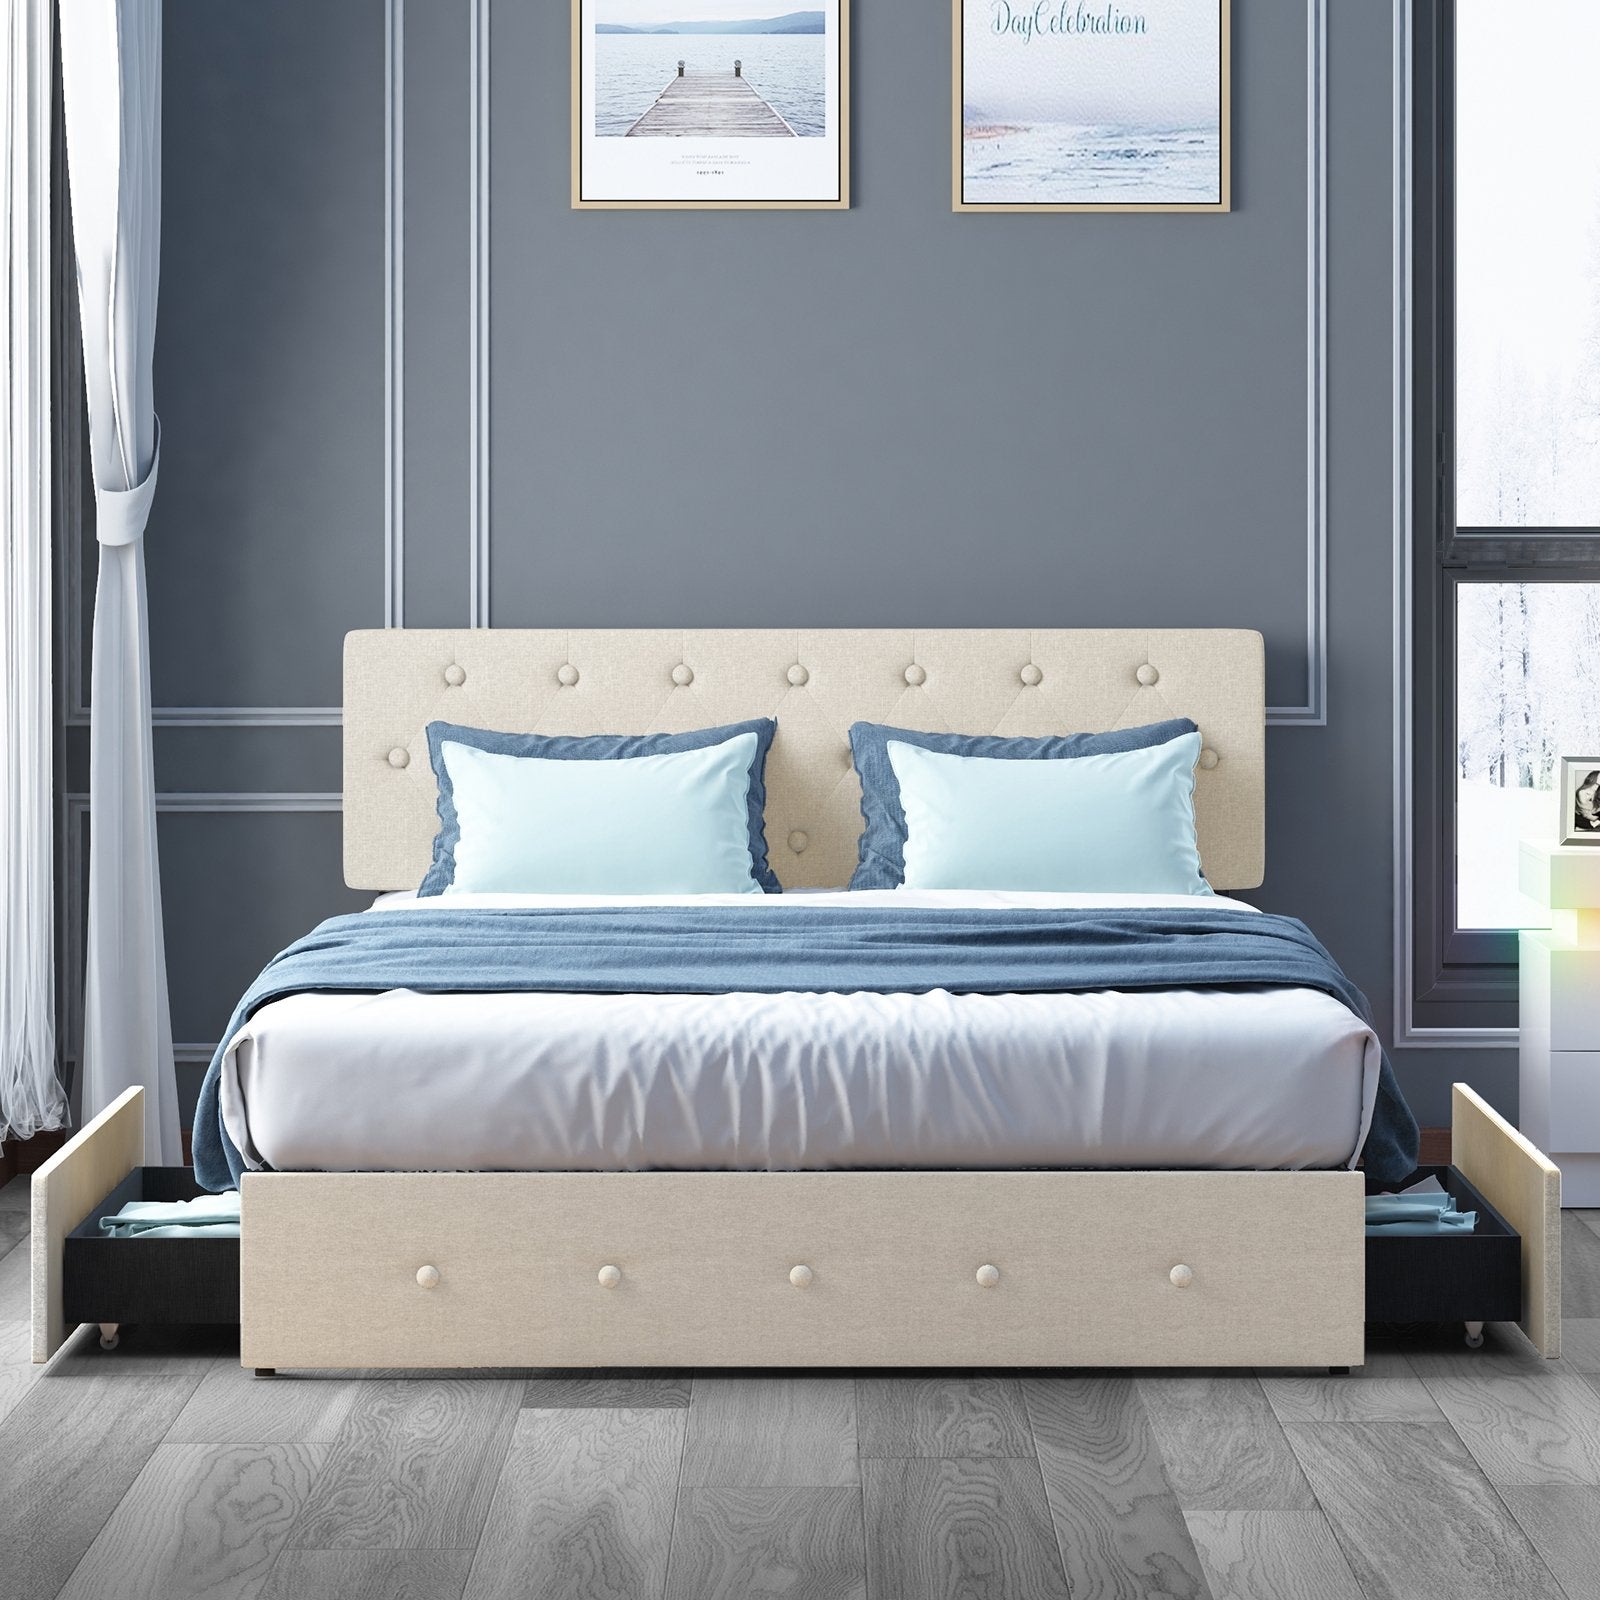 Upholstered Bed Frame | Linen Fabric Diamond-Shaped Button Tufted Headboard With Wood Slat Bed And 4 Storage Drawers - uenjoybed